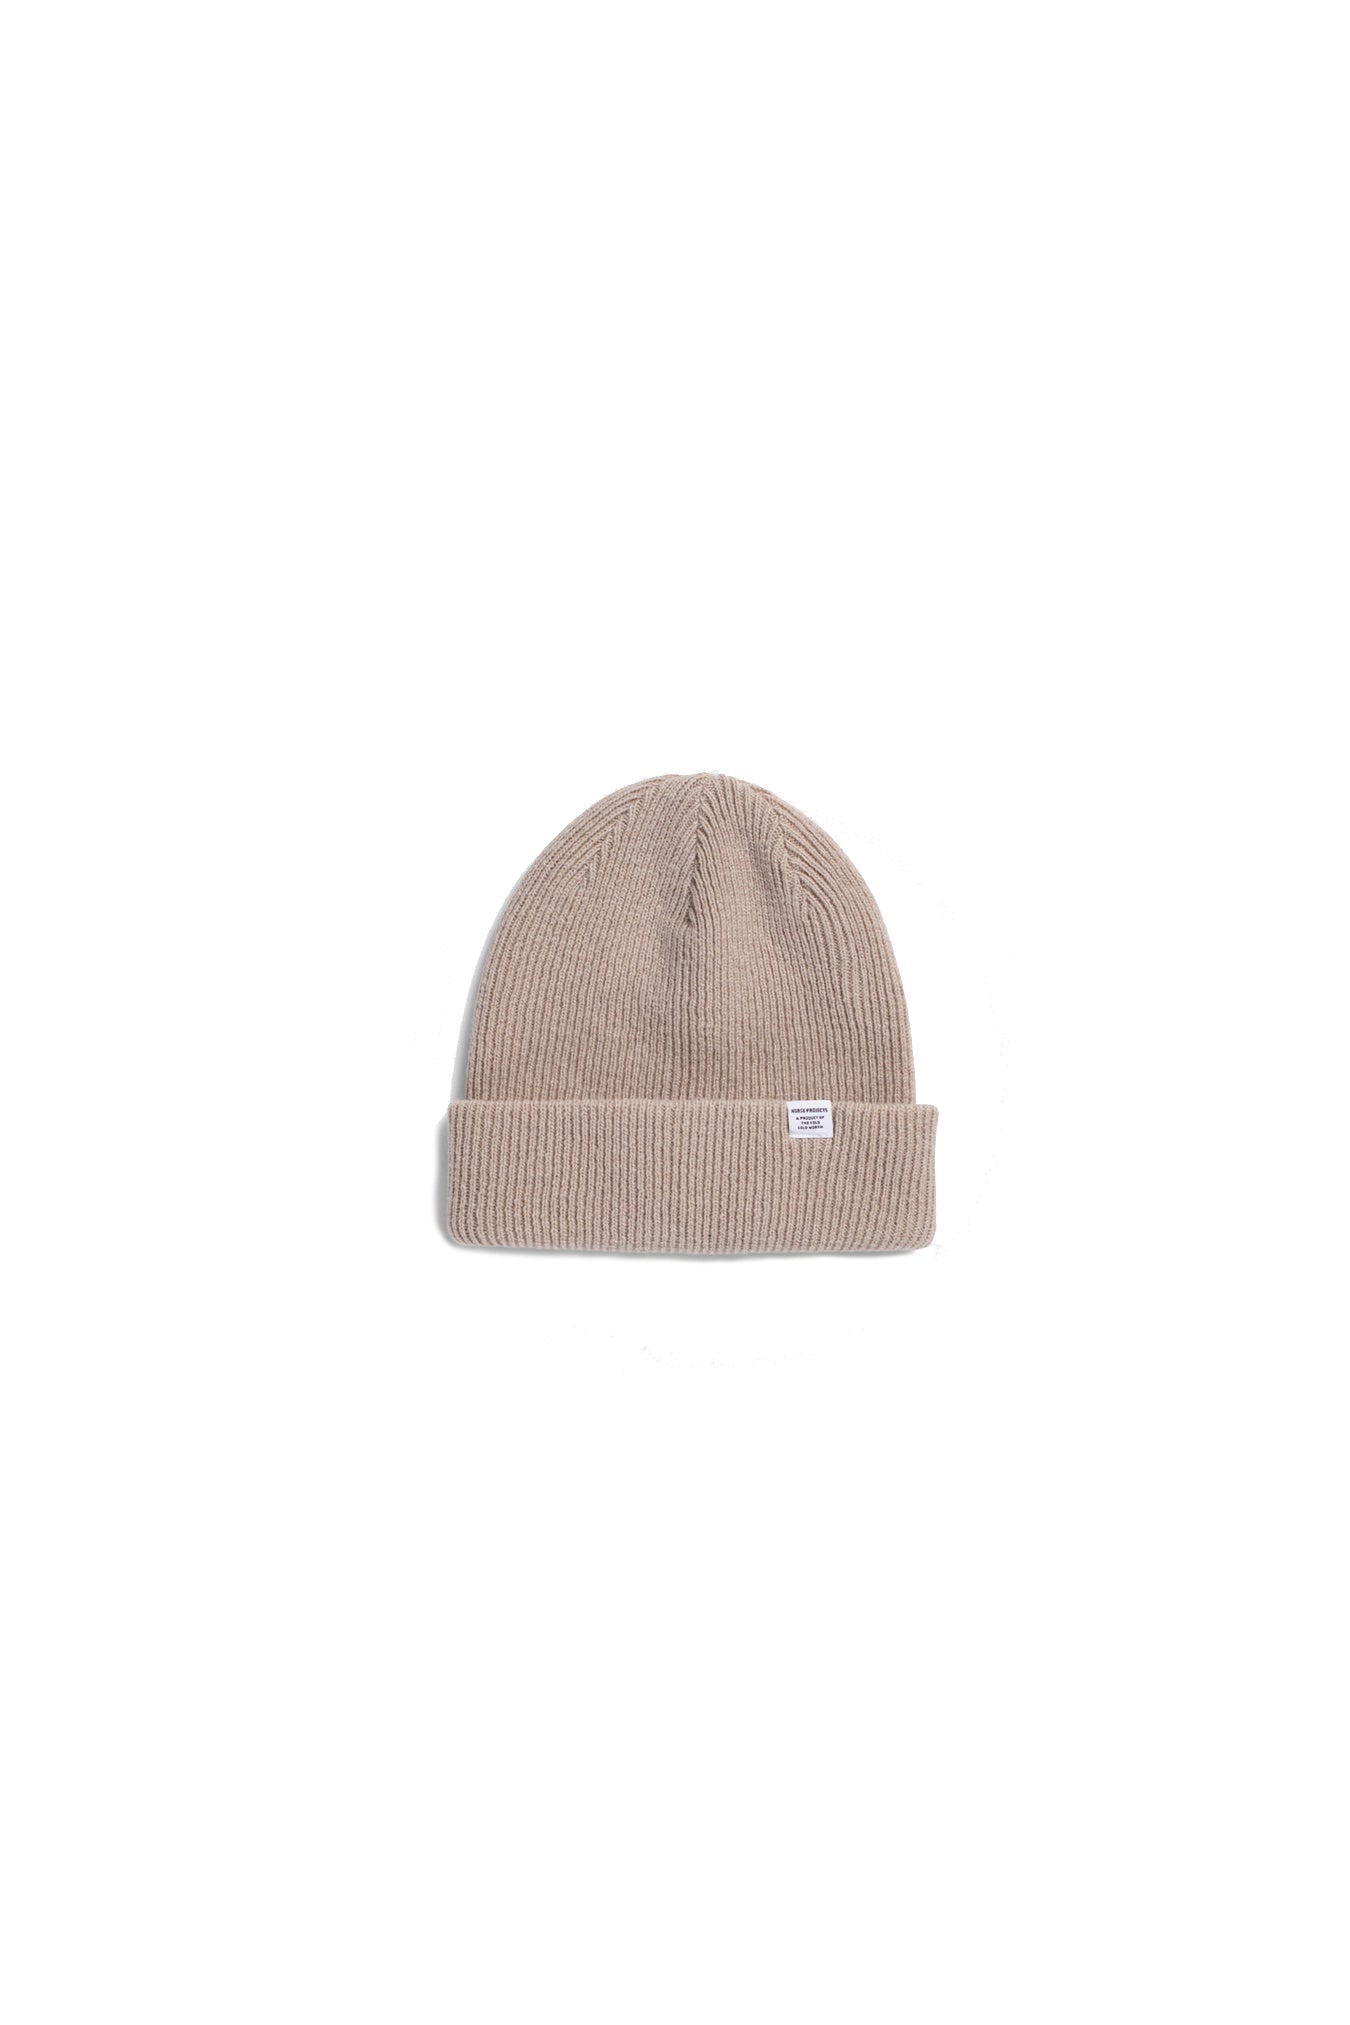 Norse Beanie UTILITY KHAKI NORSE PROJECTS